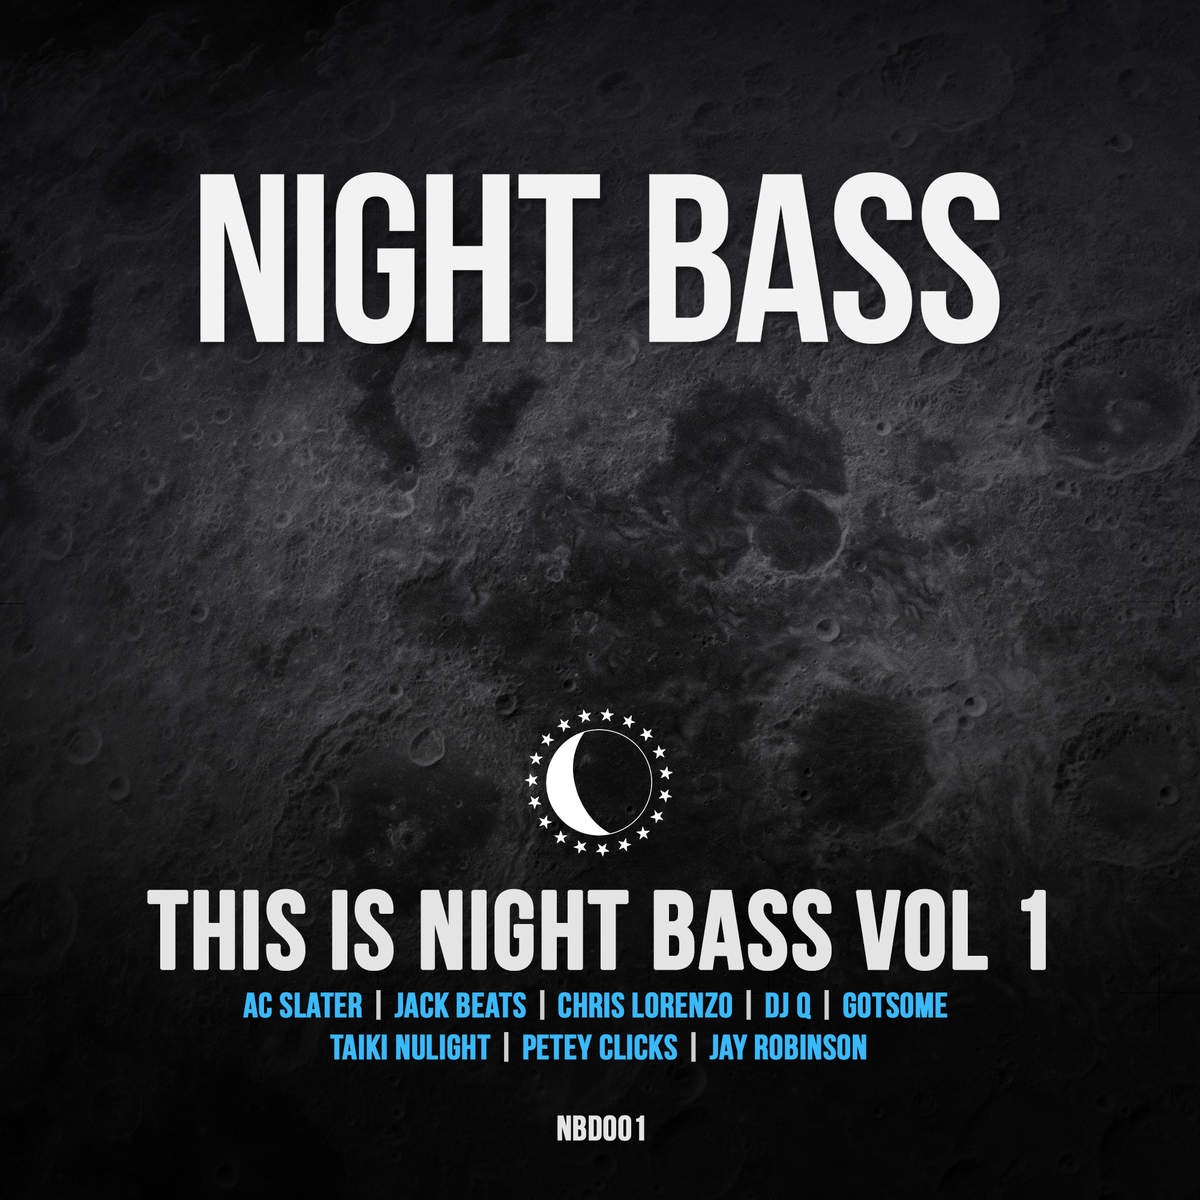 This is Night Bass, Vol. 1